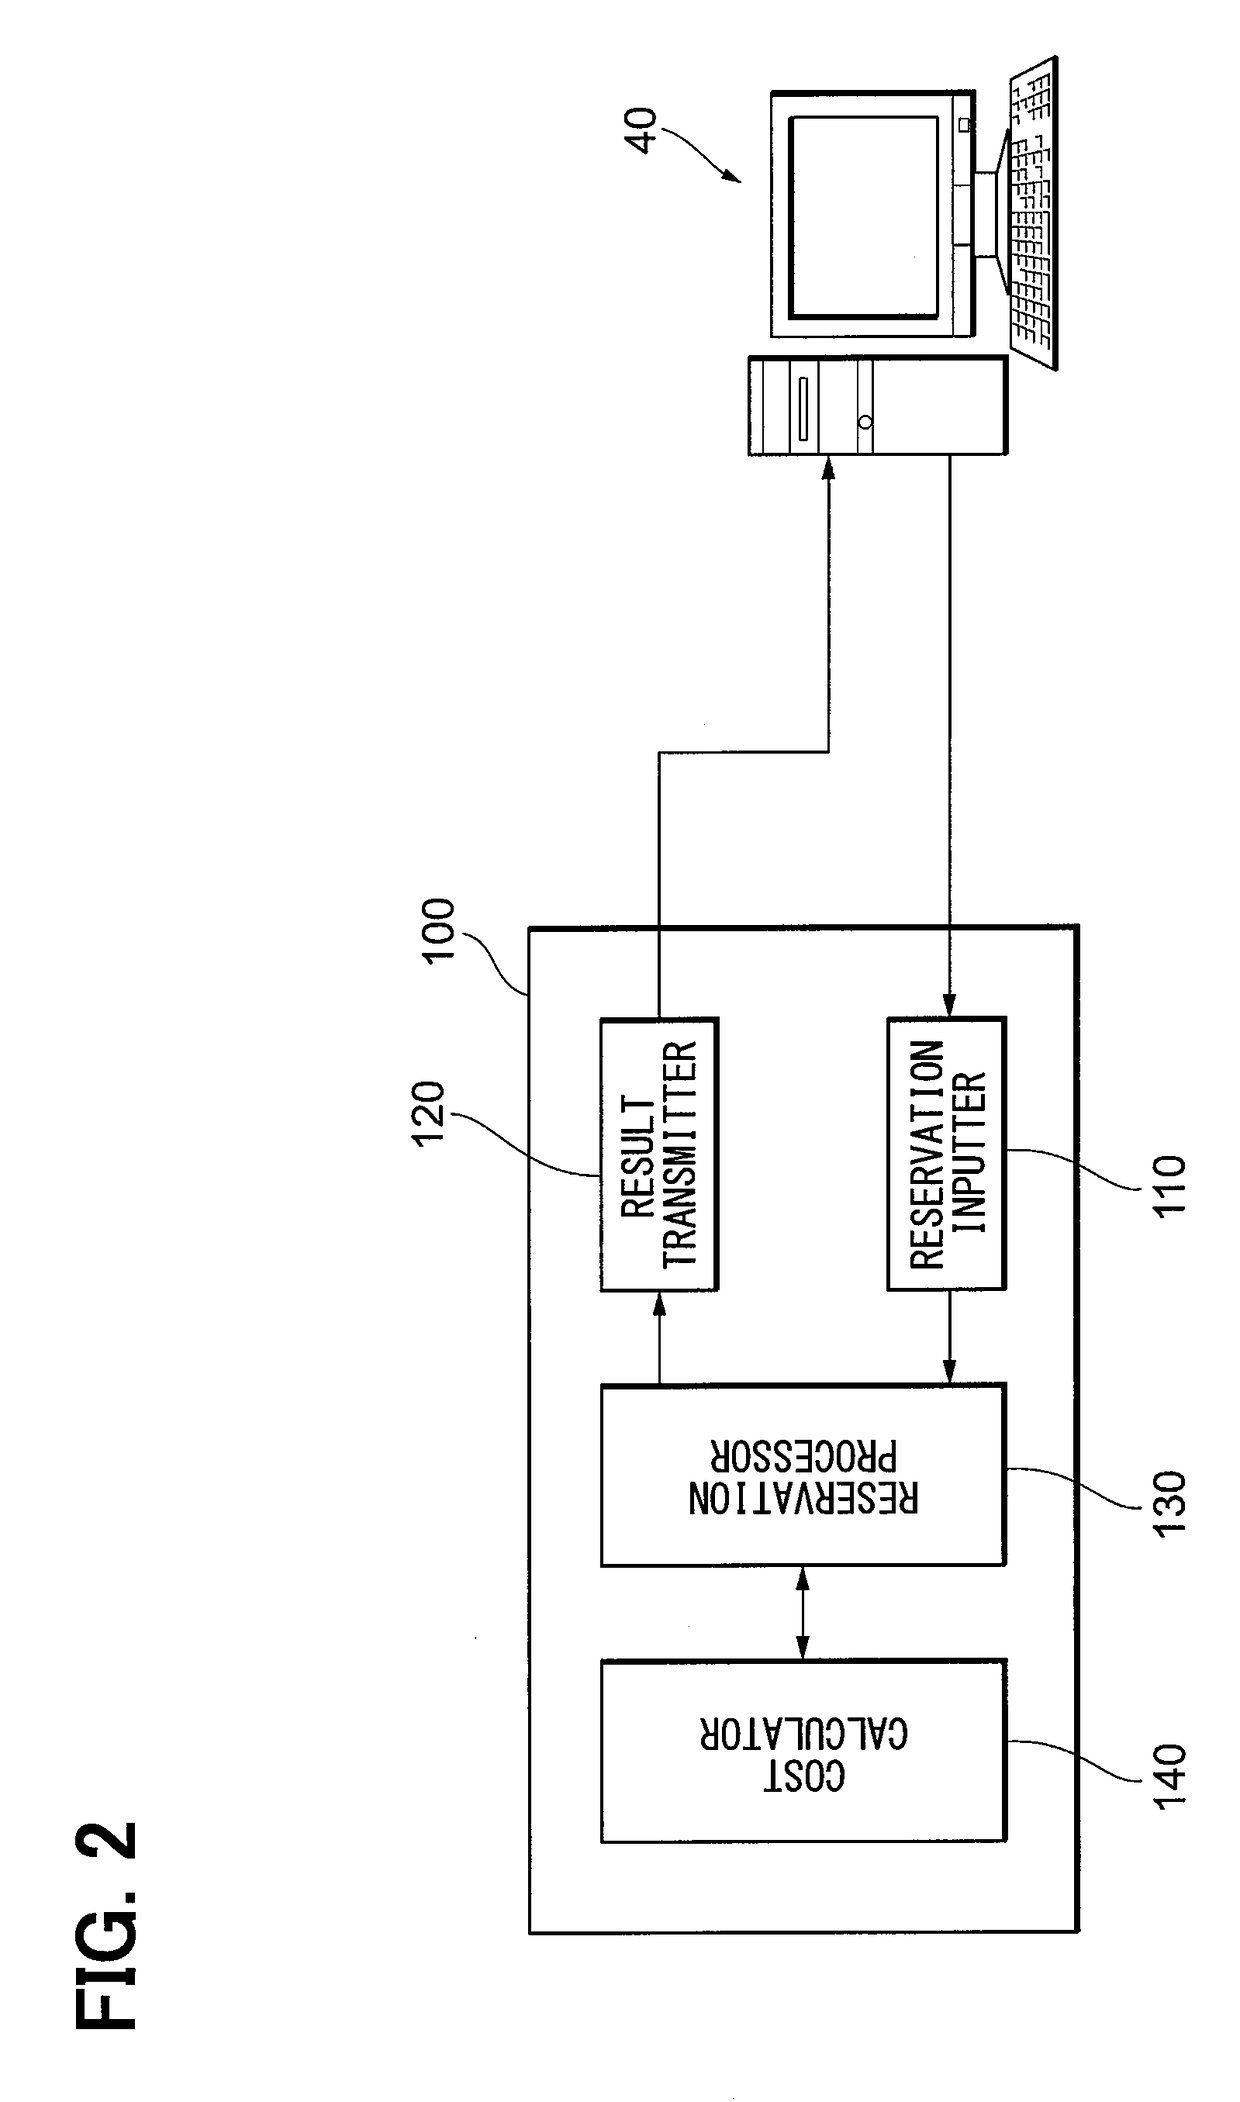 Vehicle management system for vehicle-sharing service